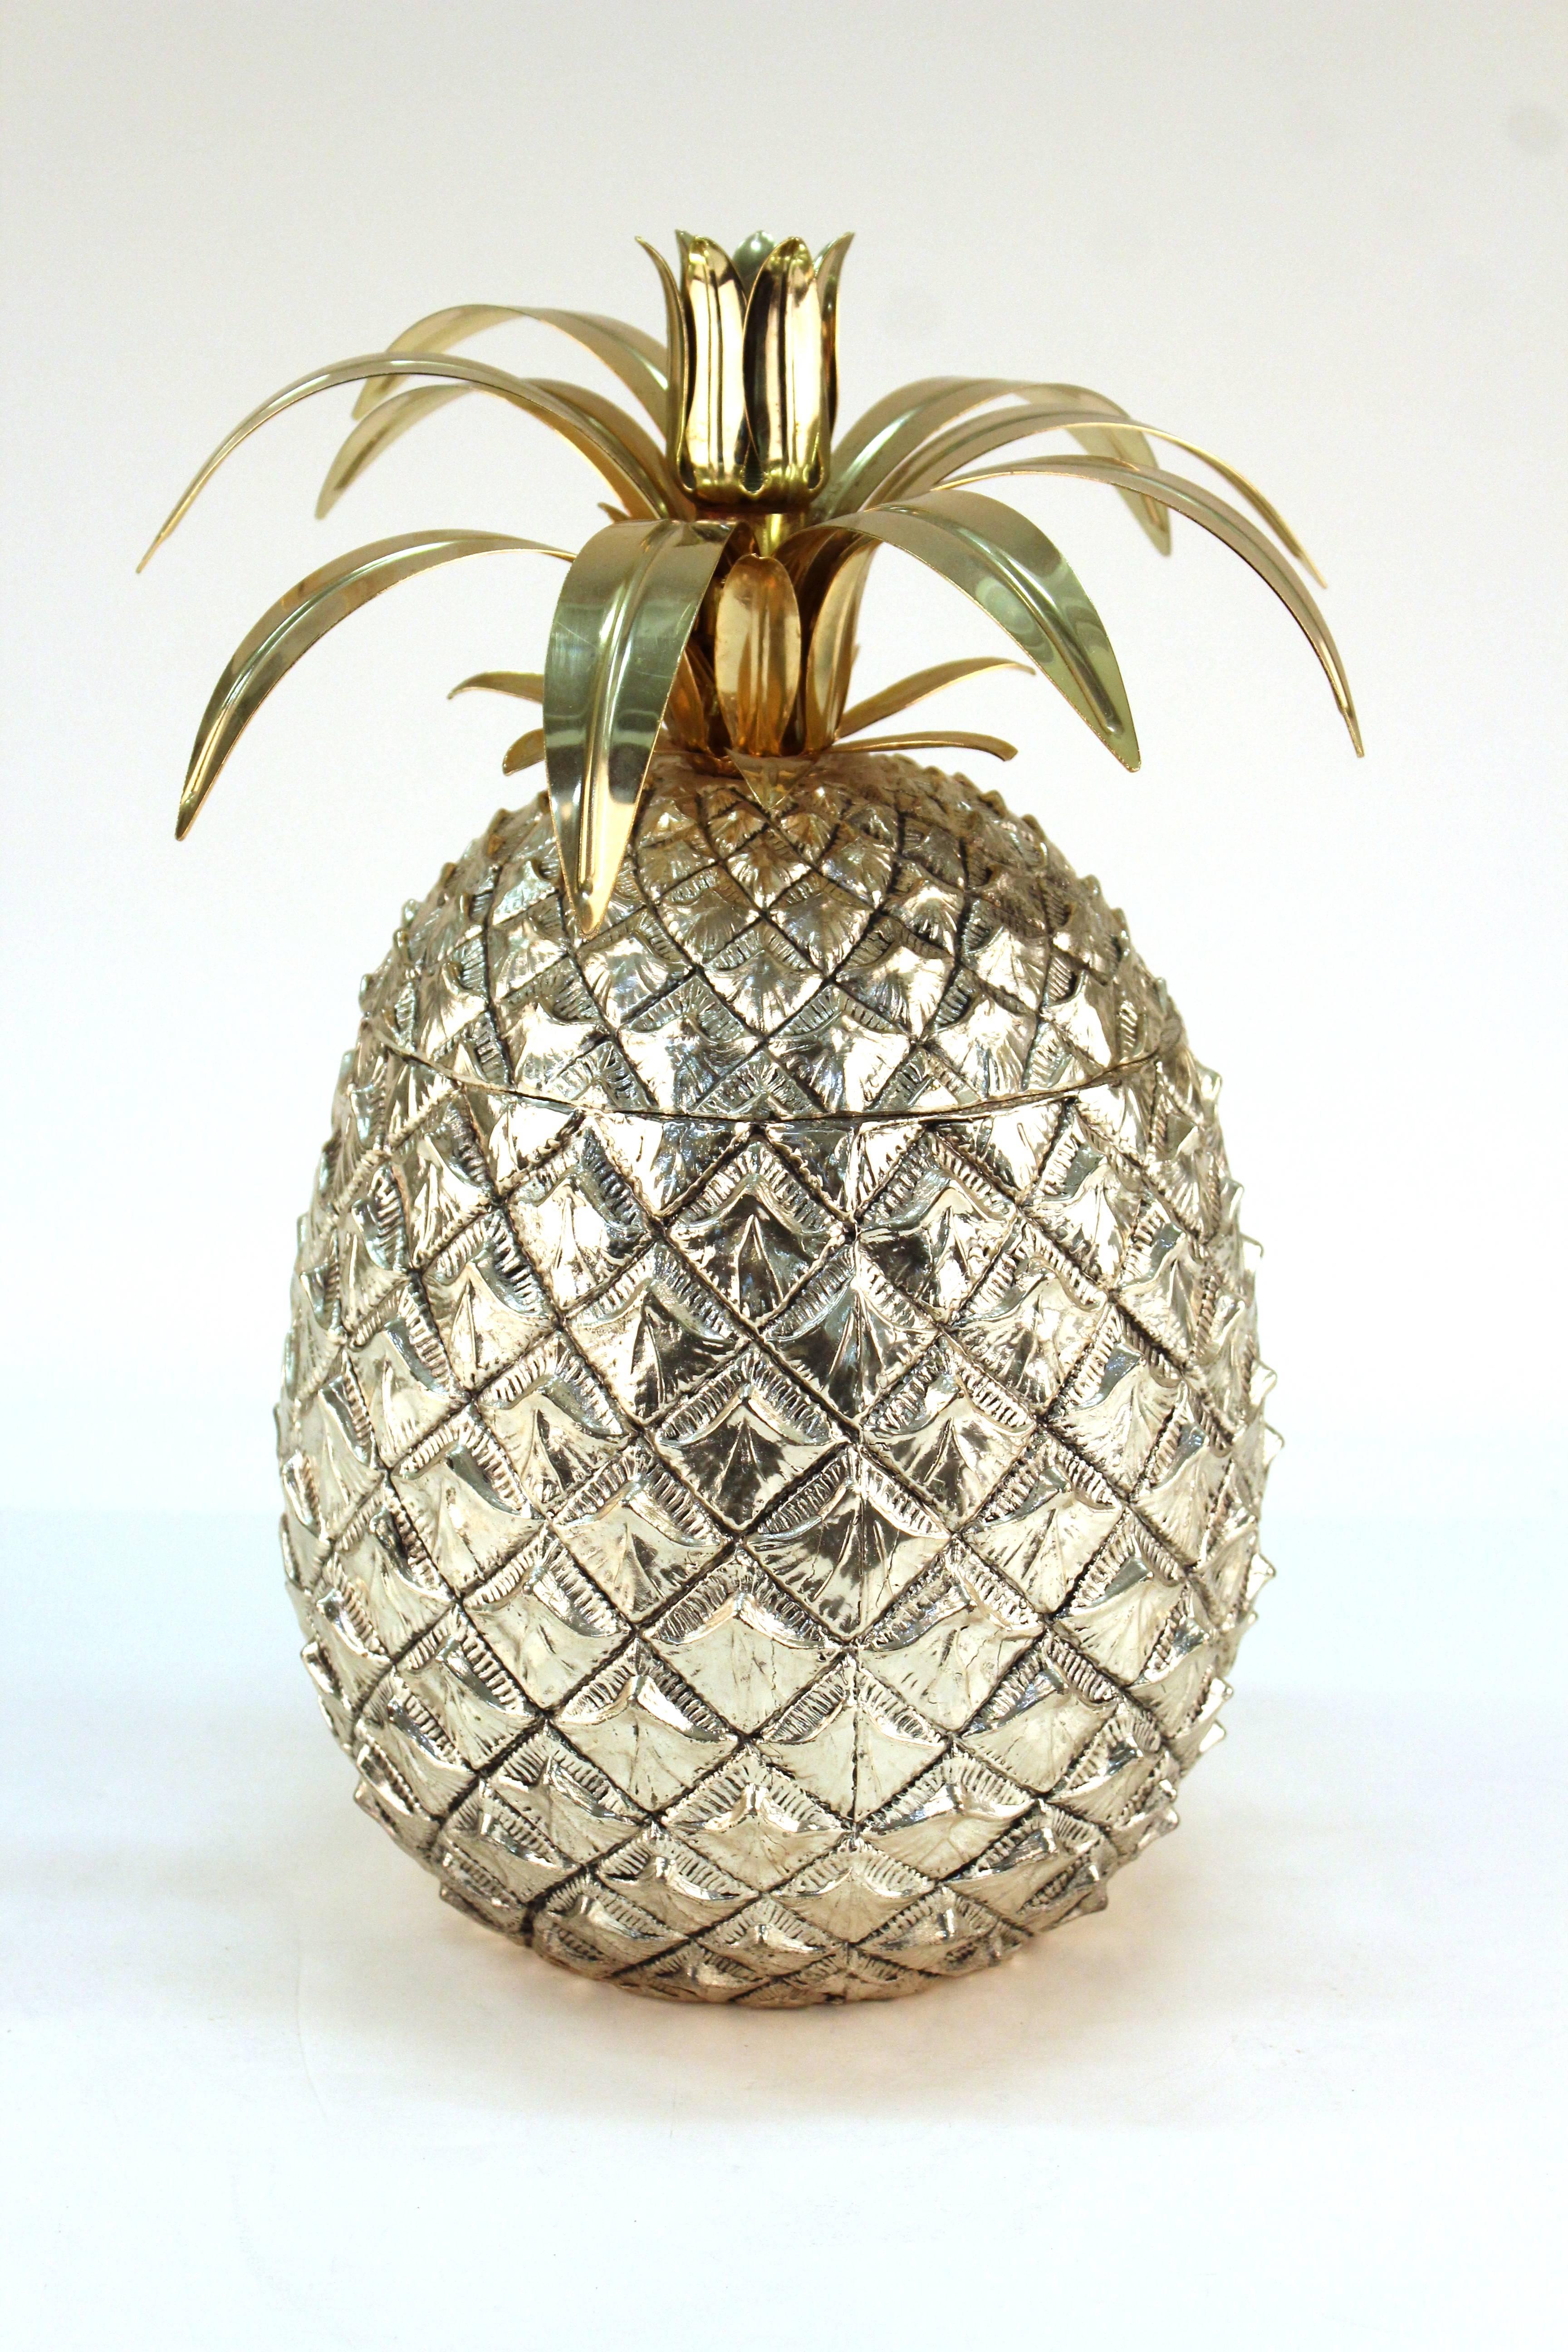 An ice bucket by Mauro Manetti in the shape of a large pineapple with a chrome colored body and a lid with gold-tone stem. Includes an insulated interior. In very good vintage condition.